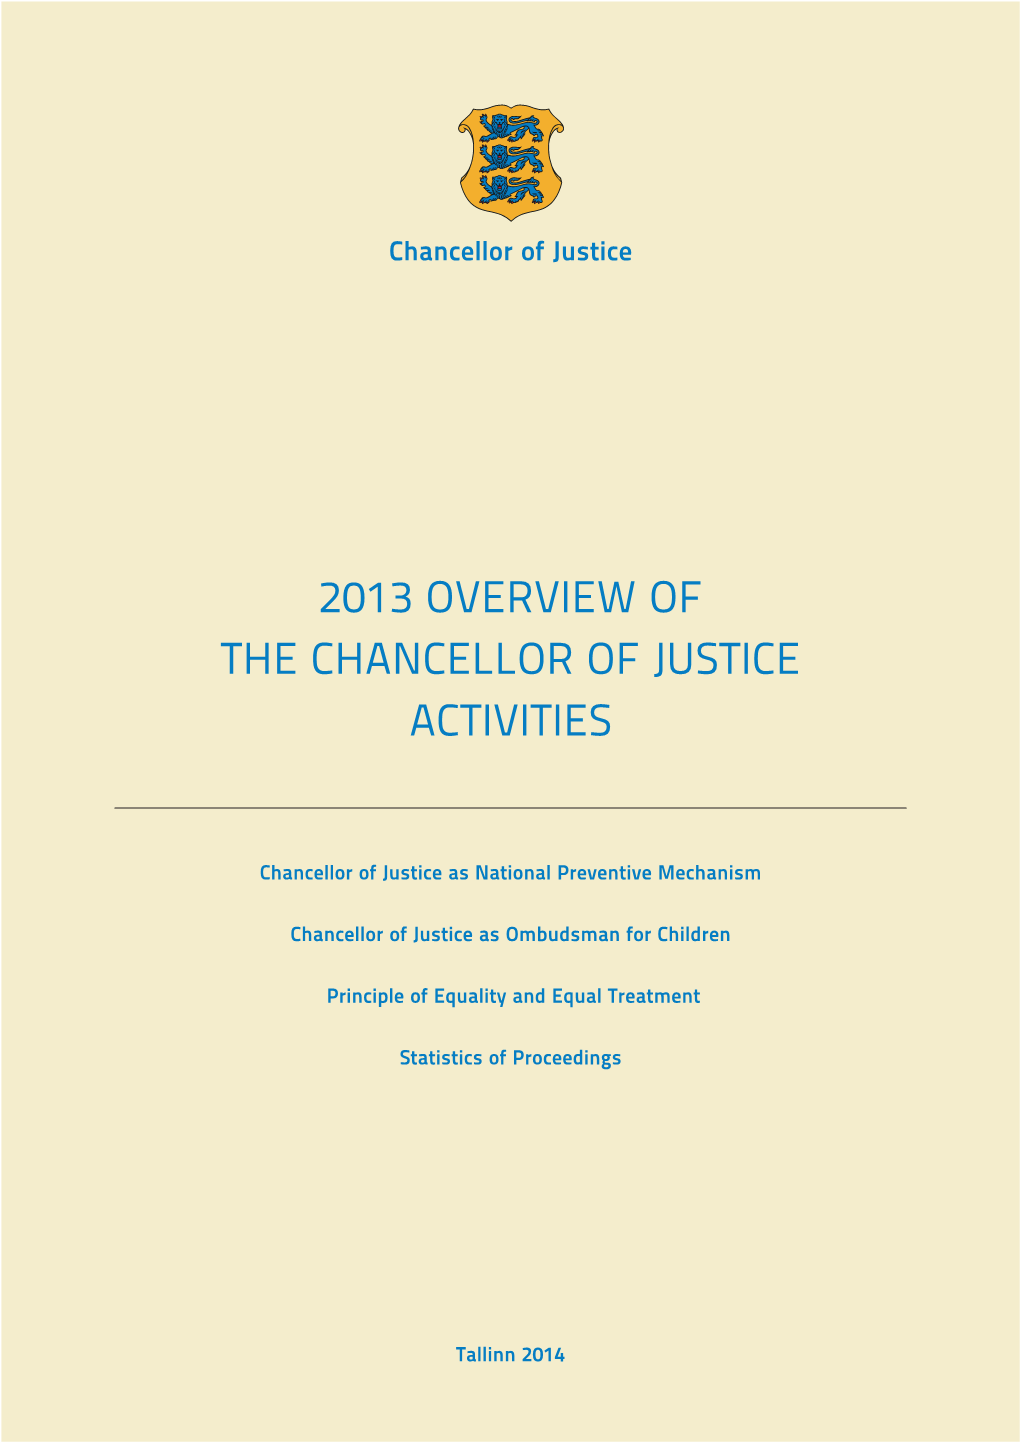 2013 Overview of the Chancellor of Justice Activities